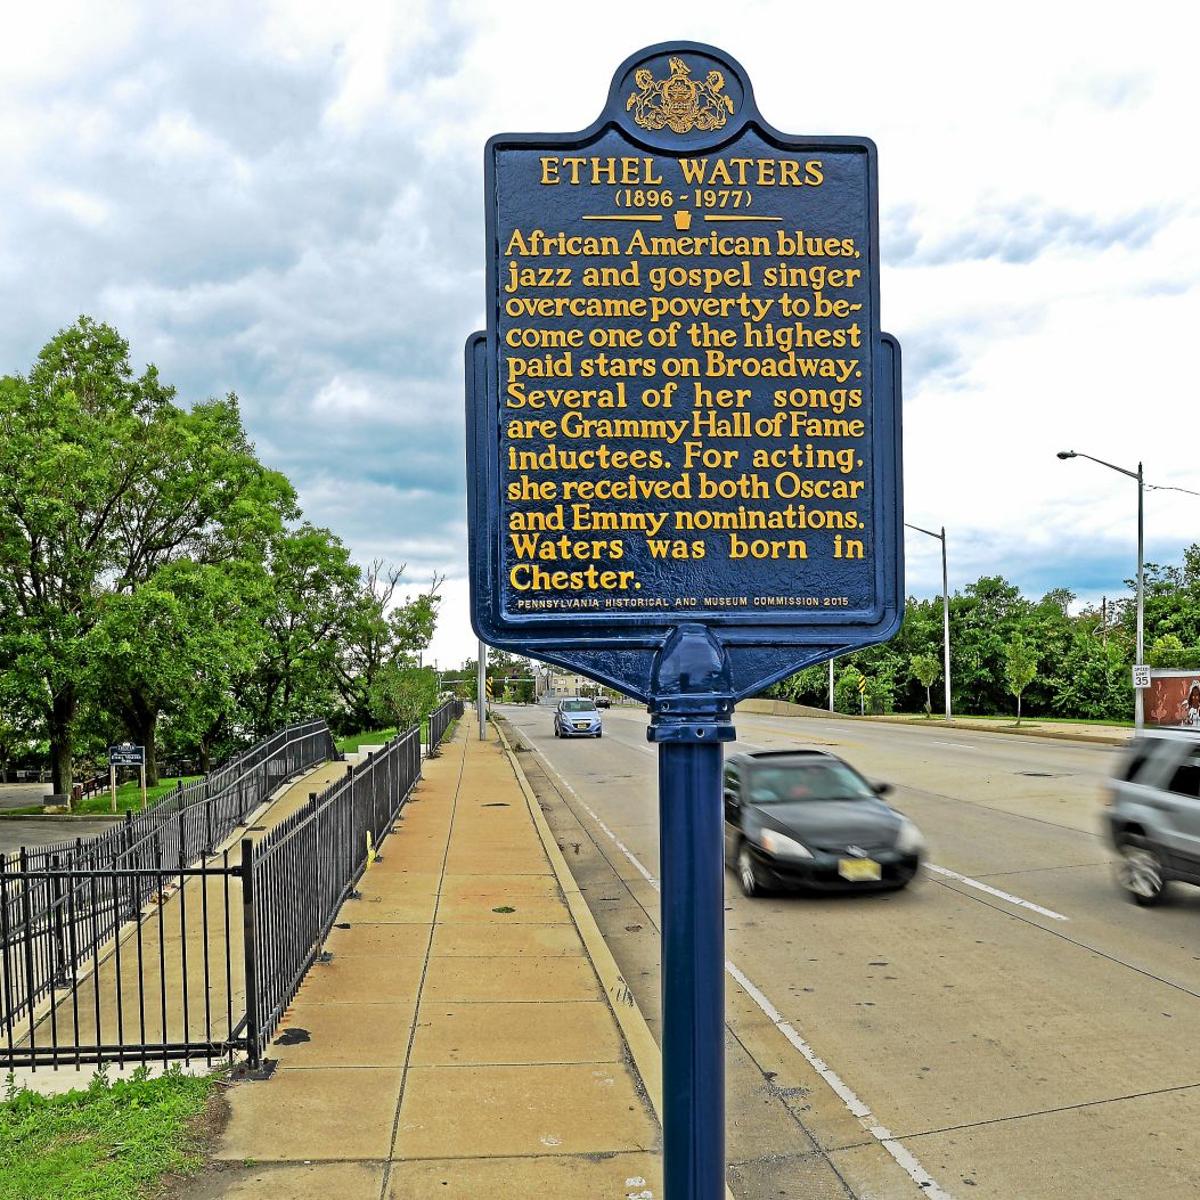 Ethel Waters Historical Marker, along Route 291 near Avenue of the States in Chester, Pennsylvania